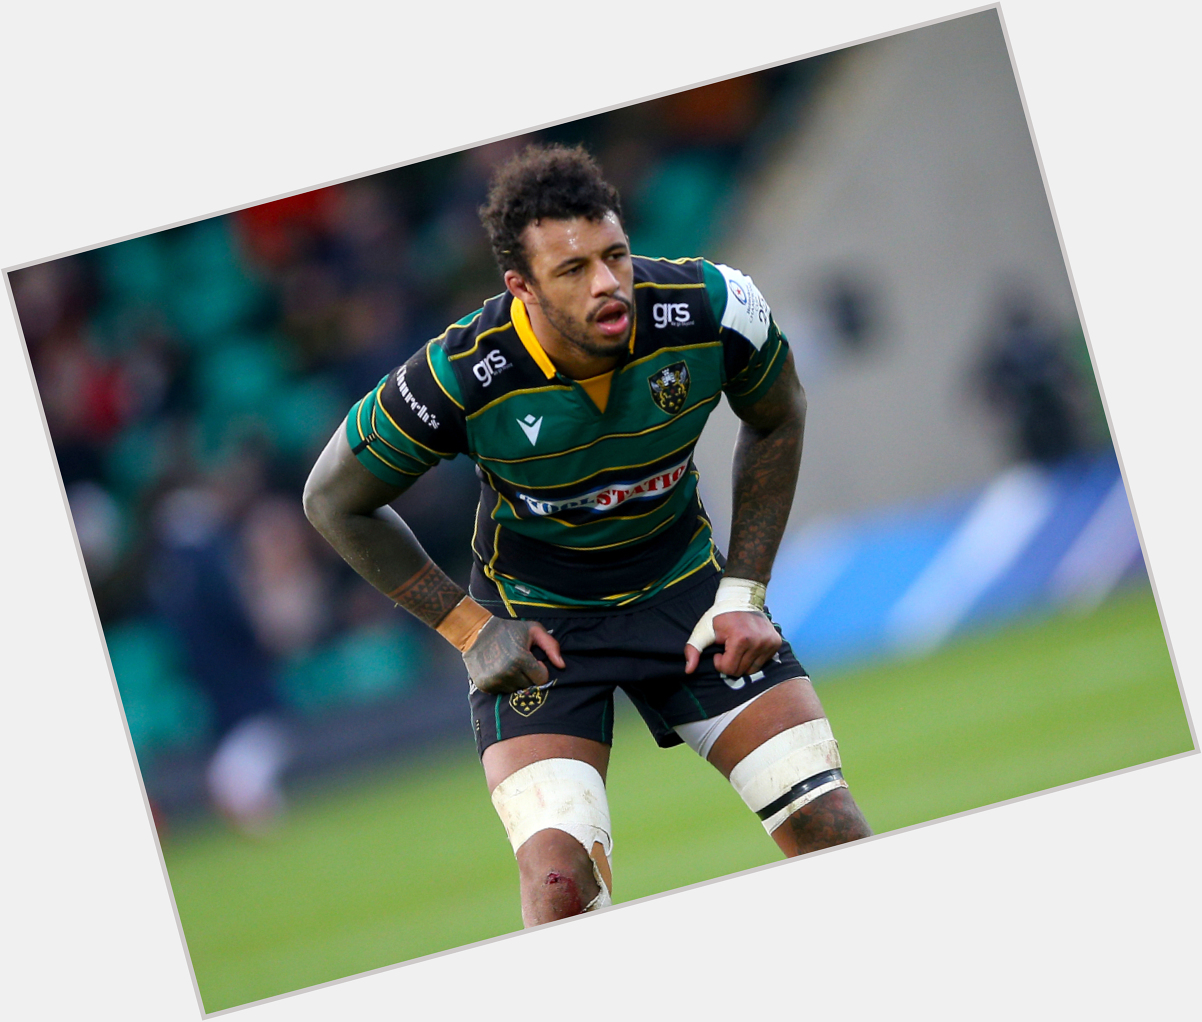 Http://fanpagepress.net/m/C/Courtney Lawes Dating 2